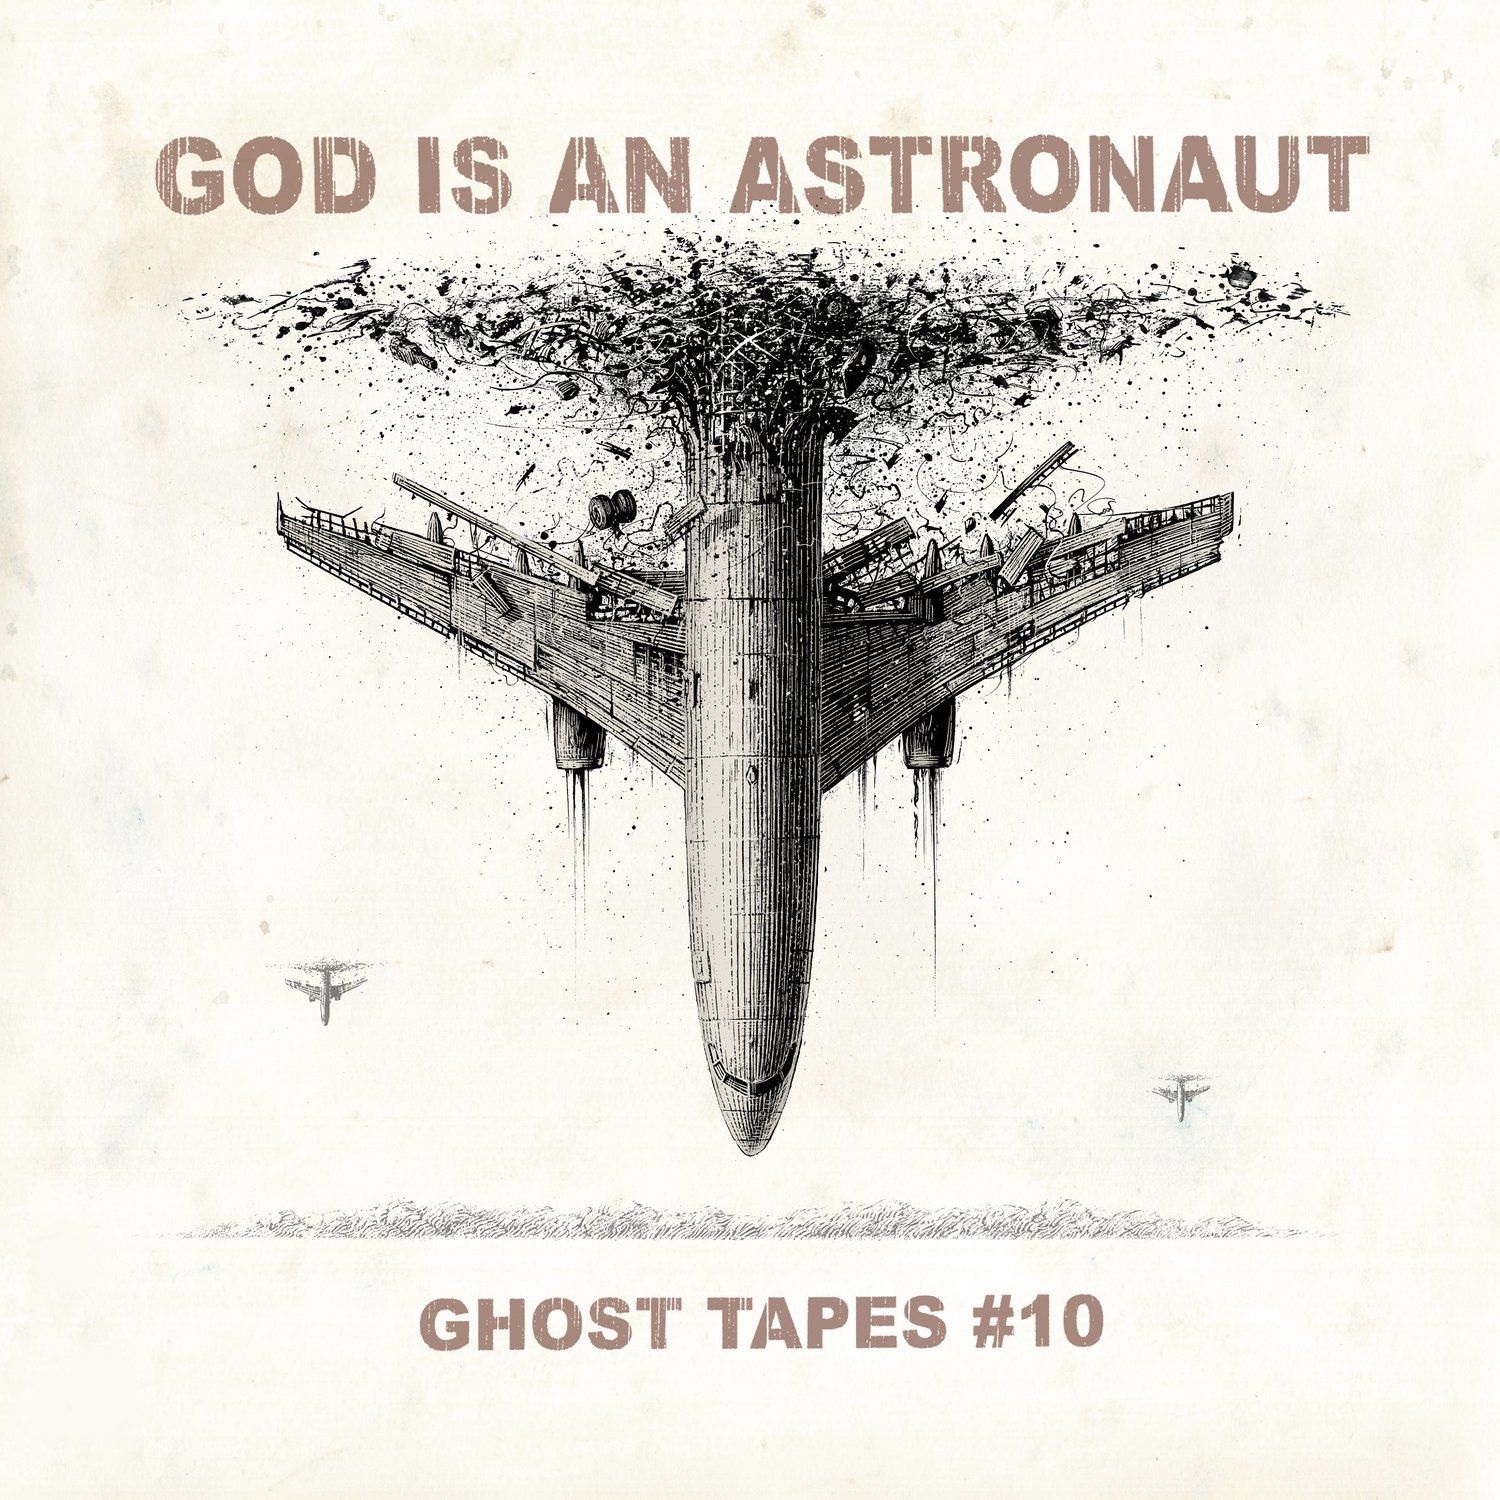 God Is an Astronaut – Ghost Tapes #10 (2021) [FLAC 24bit/96kHz]